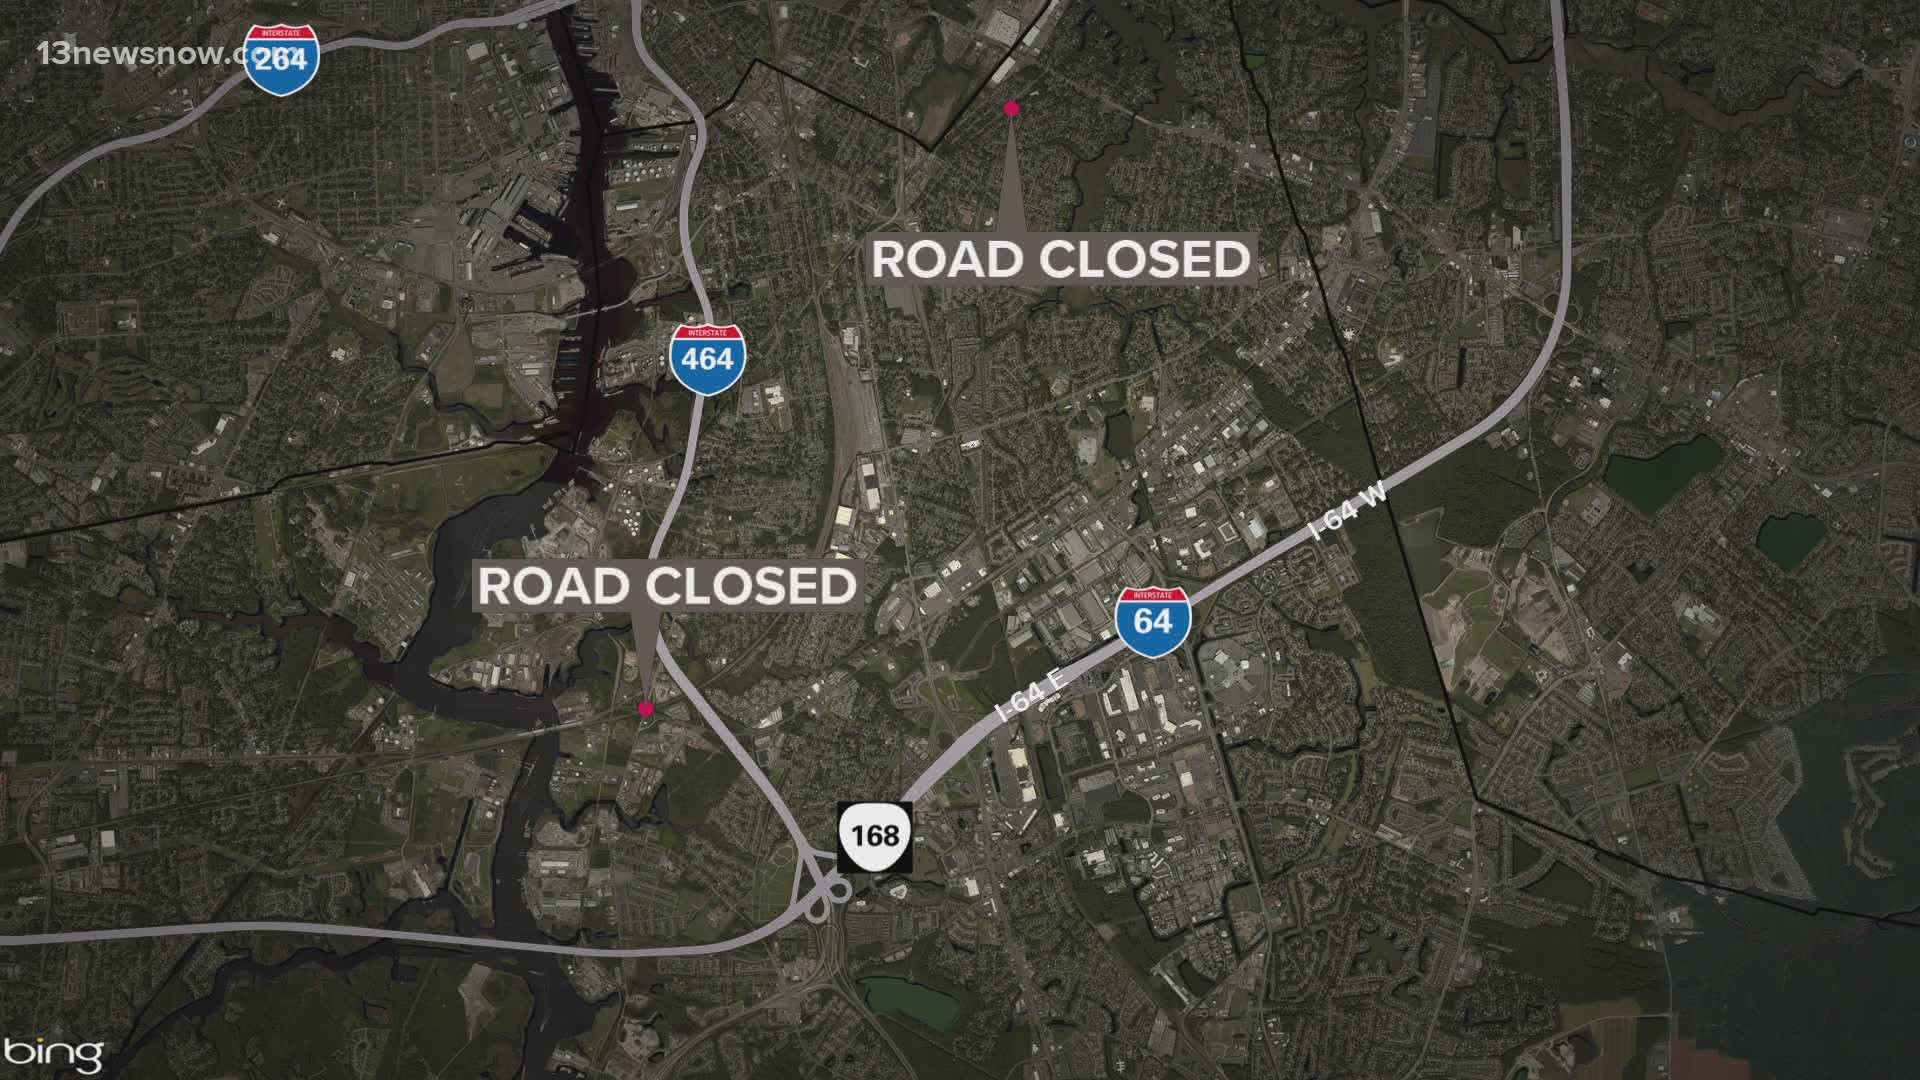 Several roads are closed around the Hampton Roads are due to high floodwaters. Officials want to remind drivers to not attempt to drive through flooded streets.